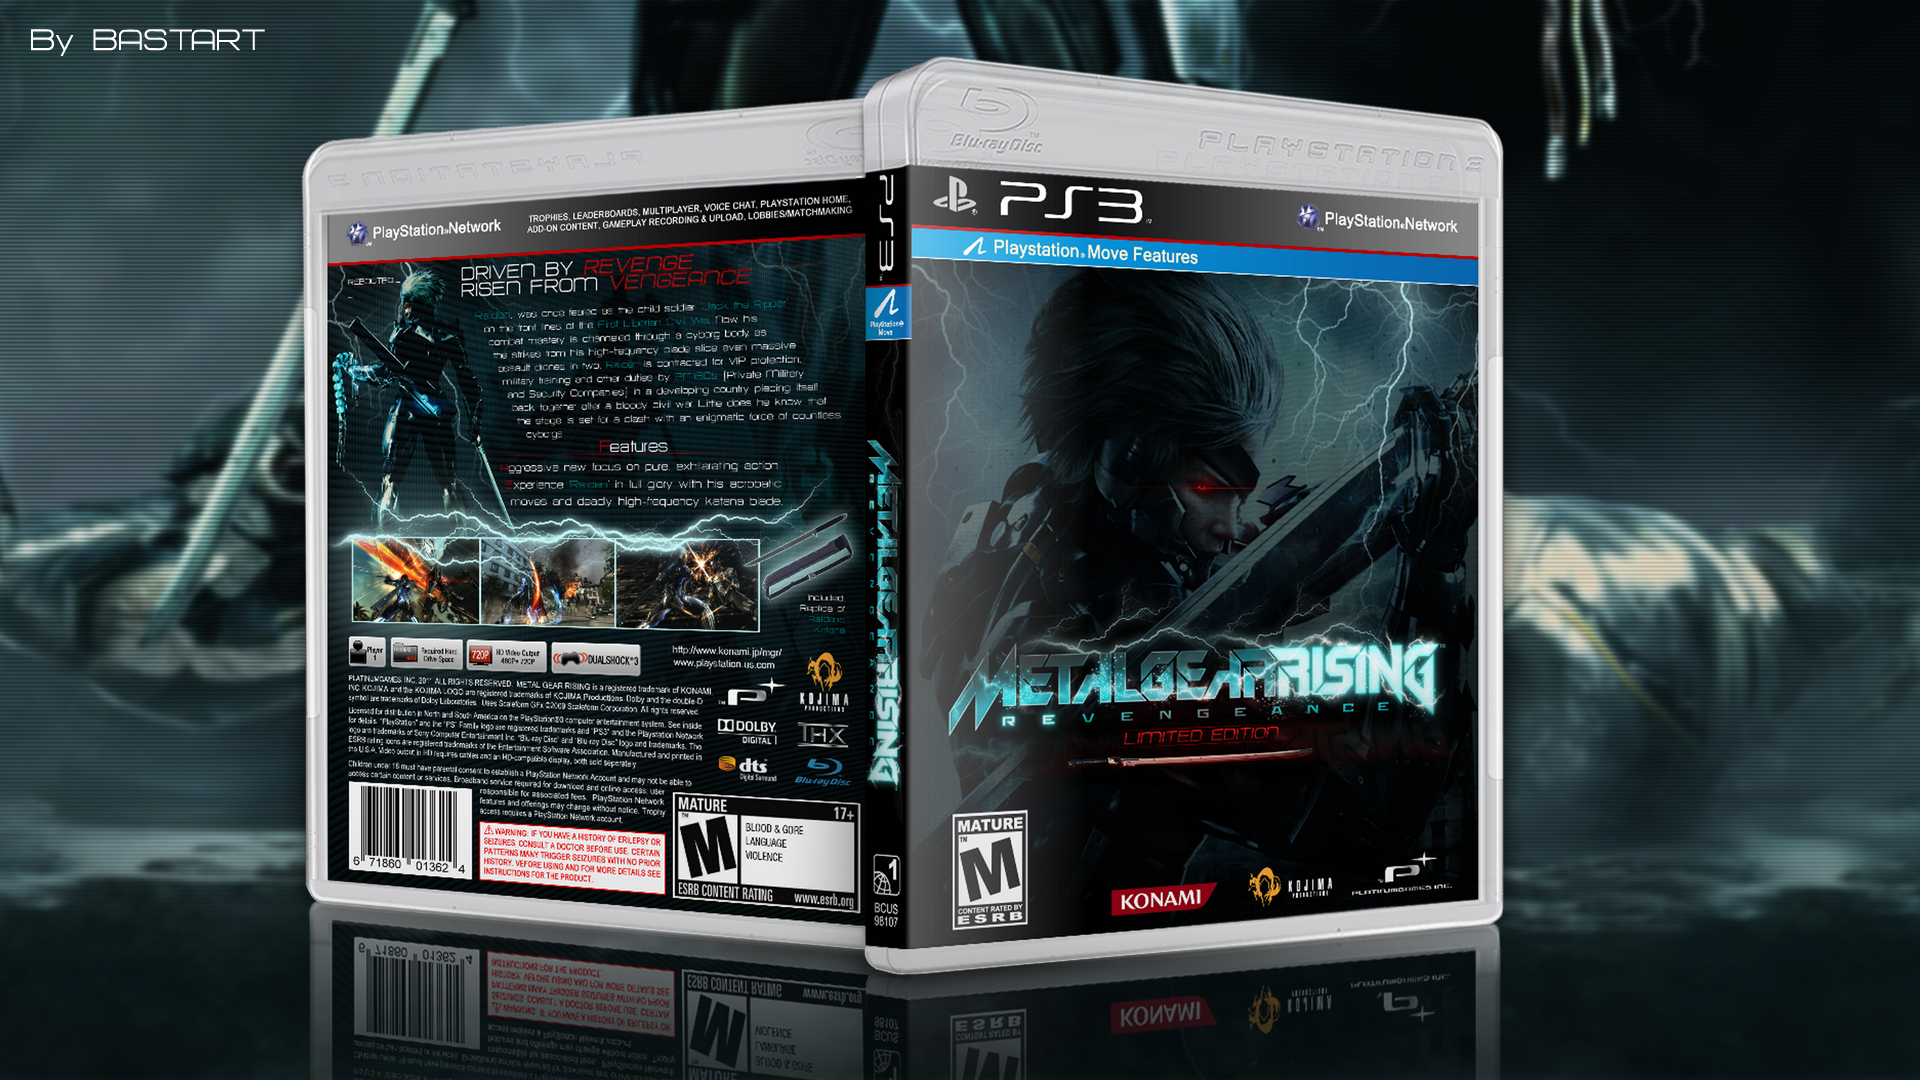 Metal Gear Rising: Revengeance (Limited Edition) box cover